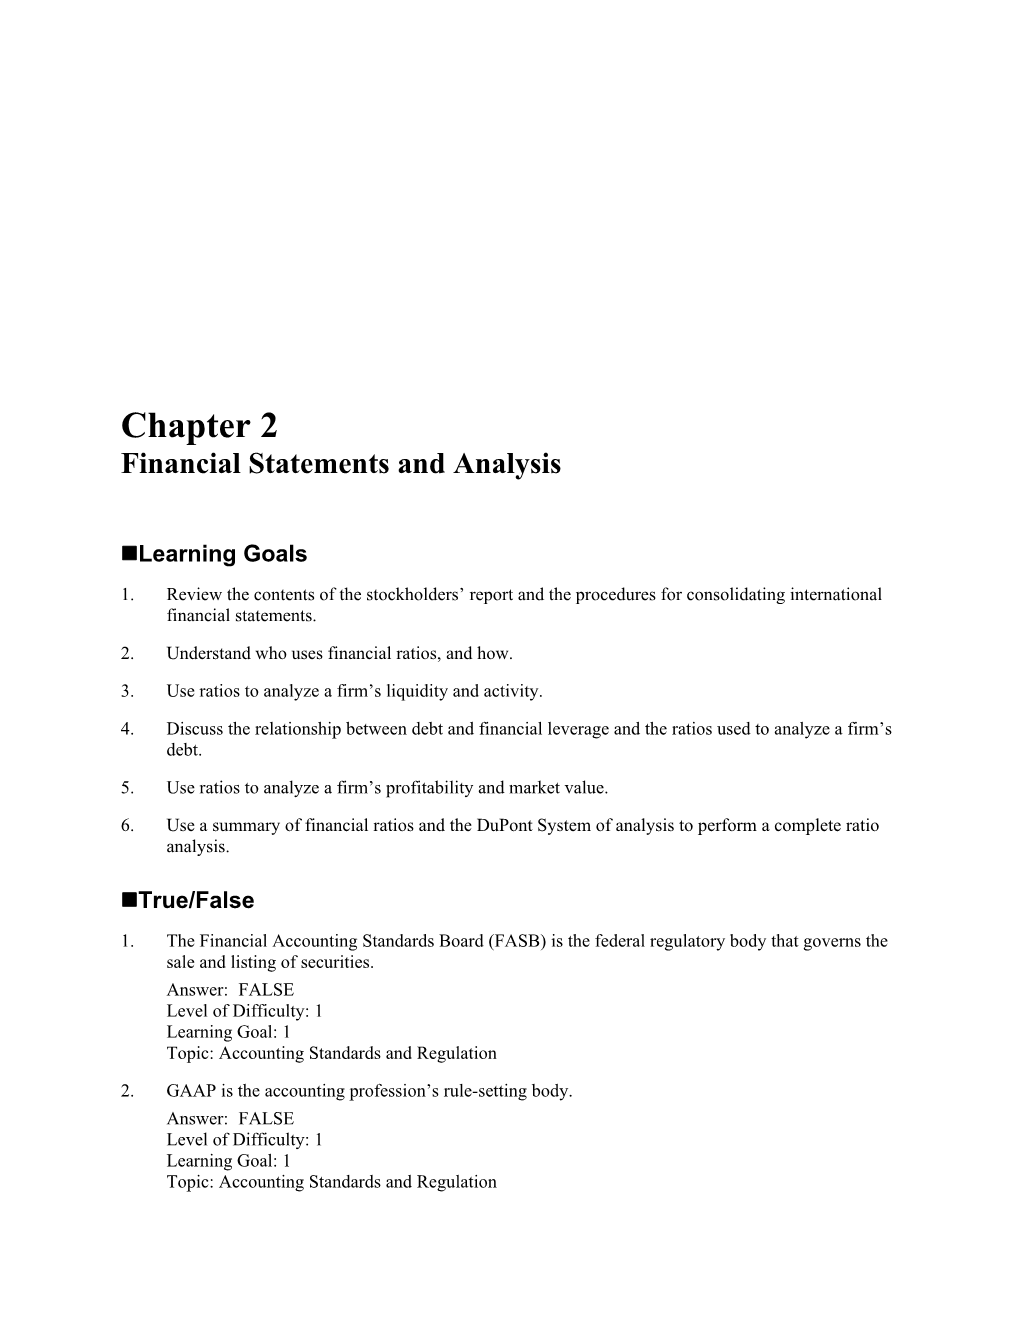 Chapter 2 Financial Statements and Analysis